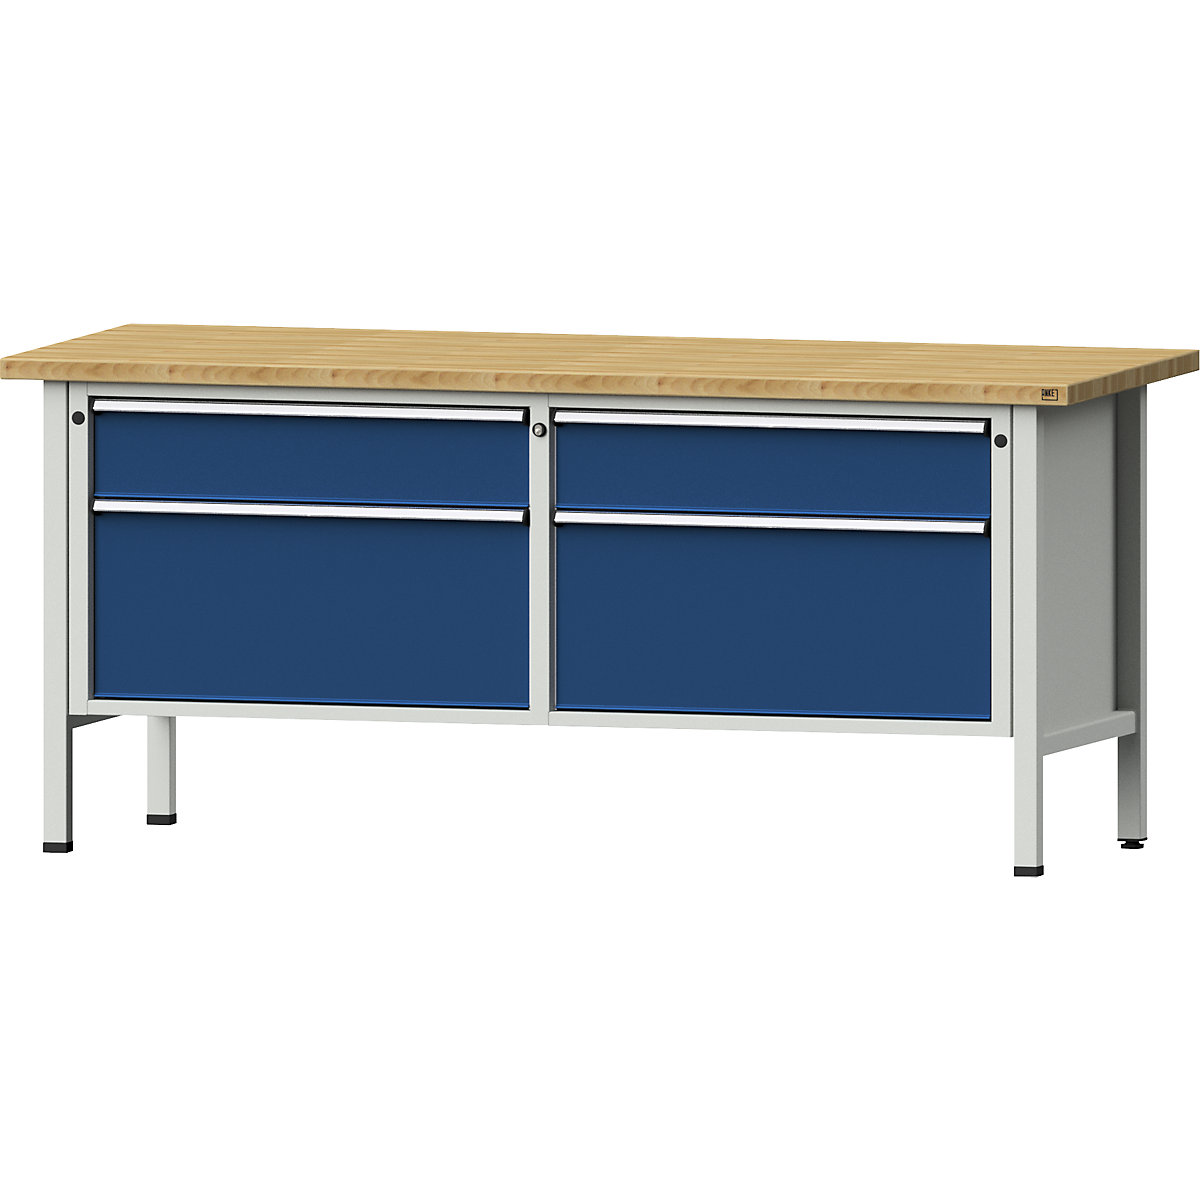 Workbenches 2000 mm wide, frame construction – ANKE, 4 drawers, solid beech worktop, height 890 mm-8